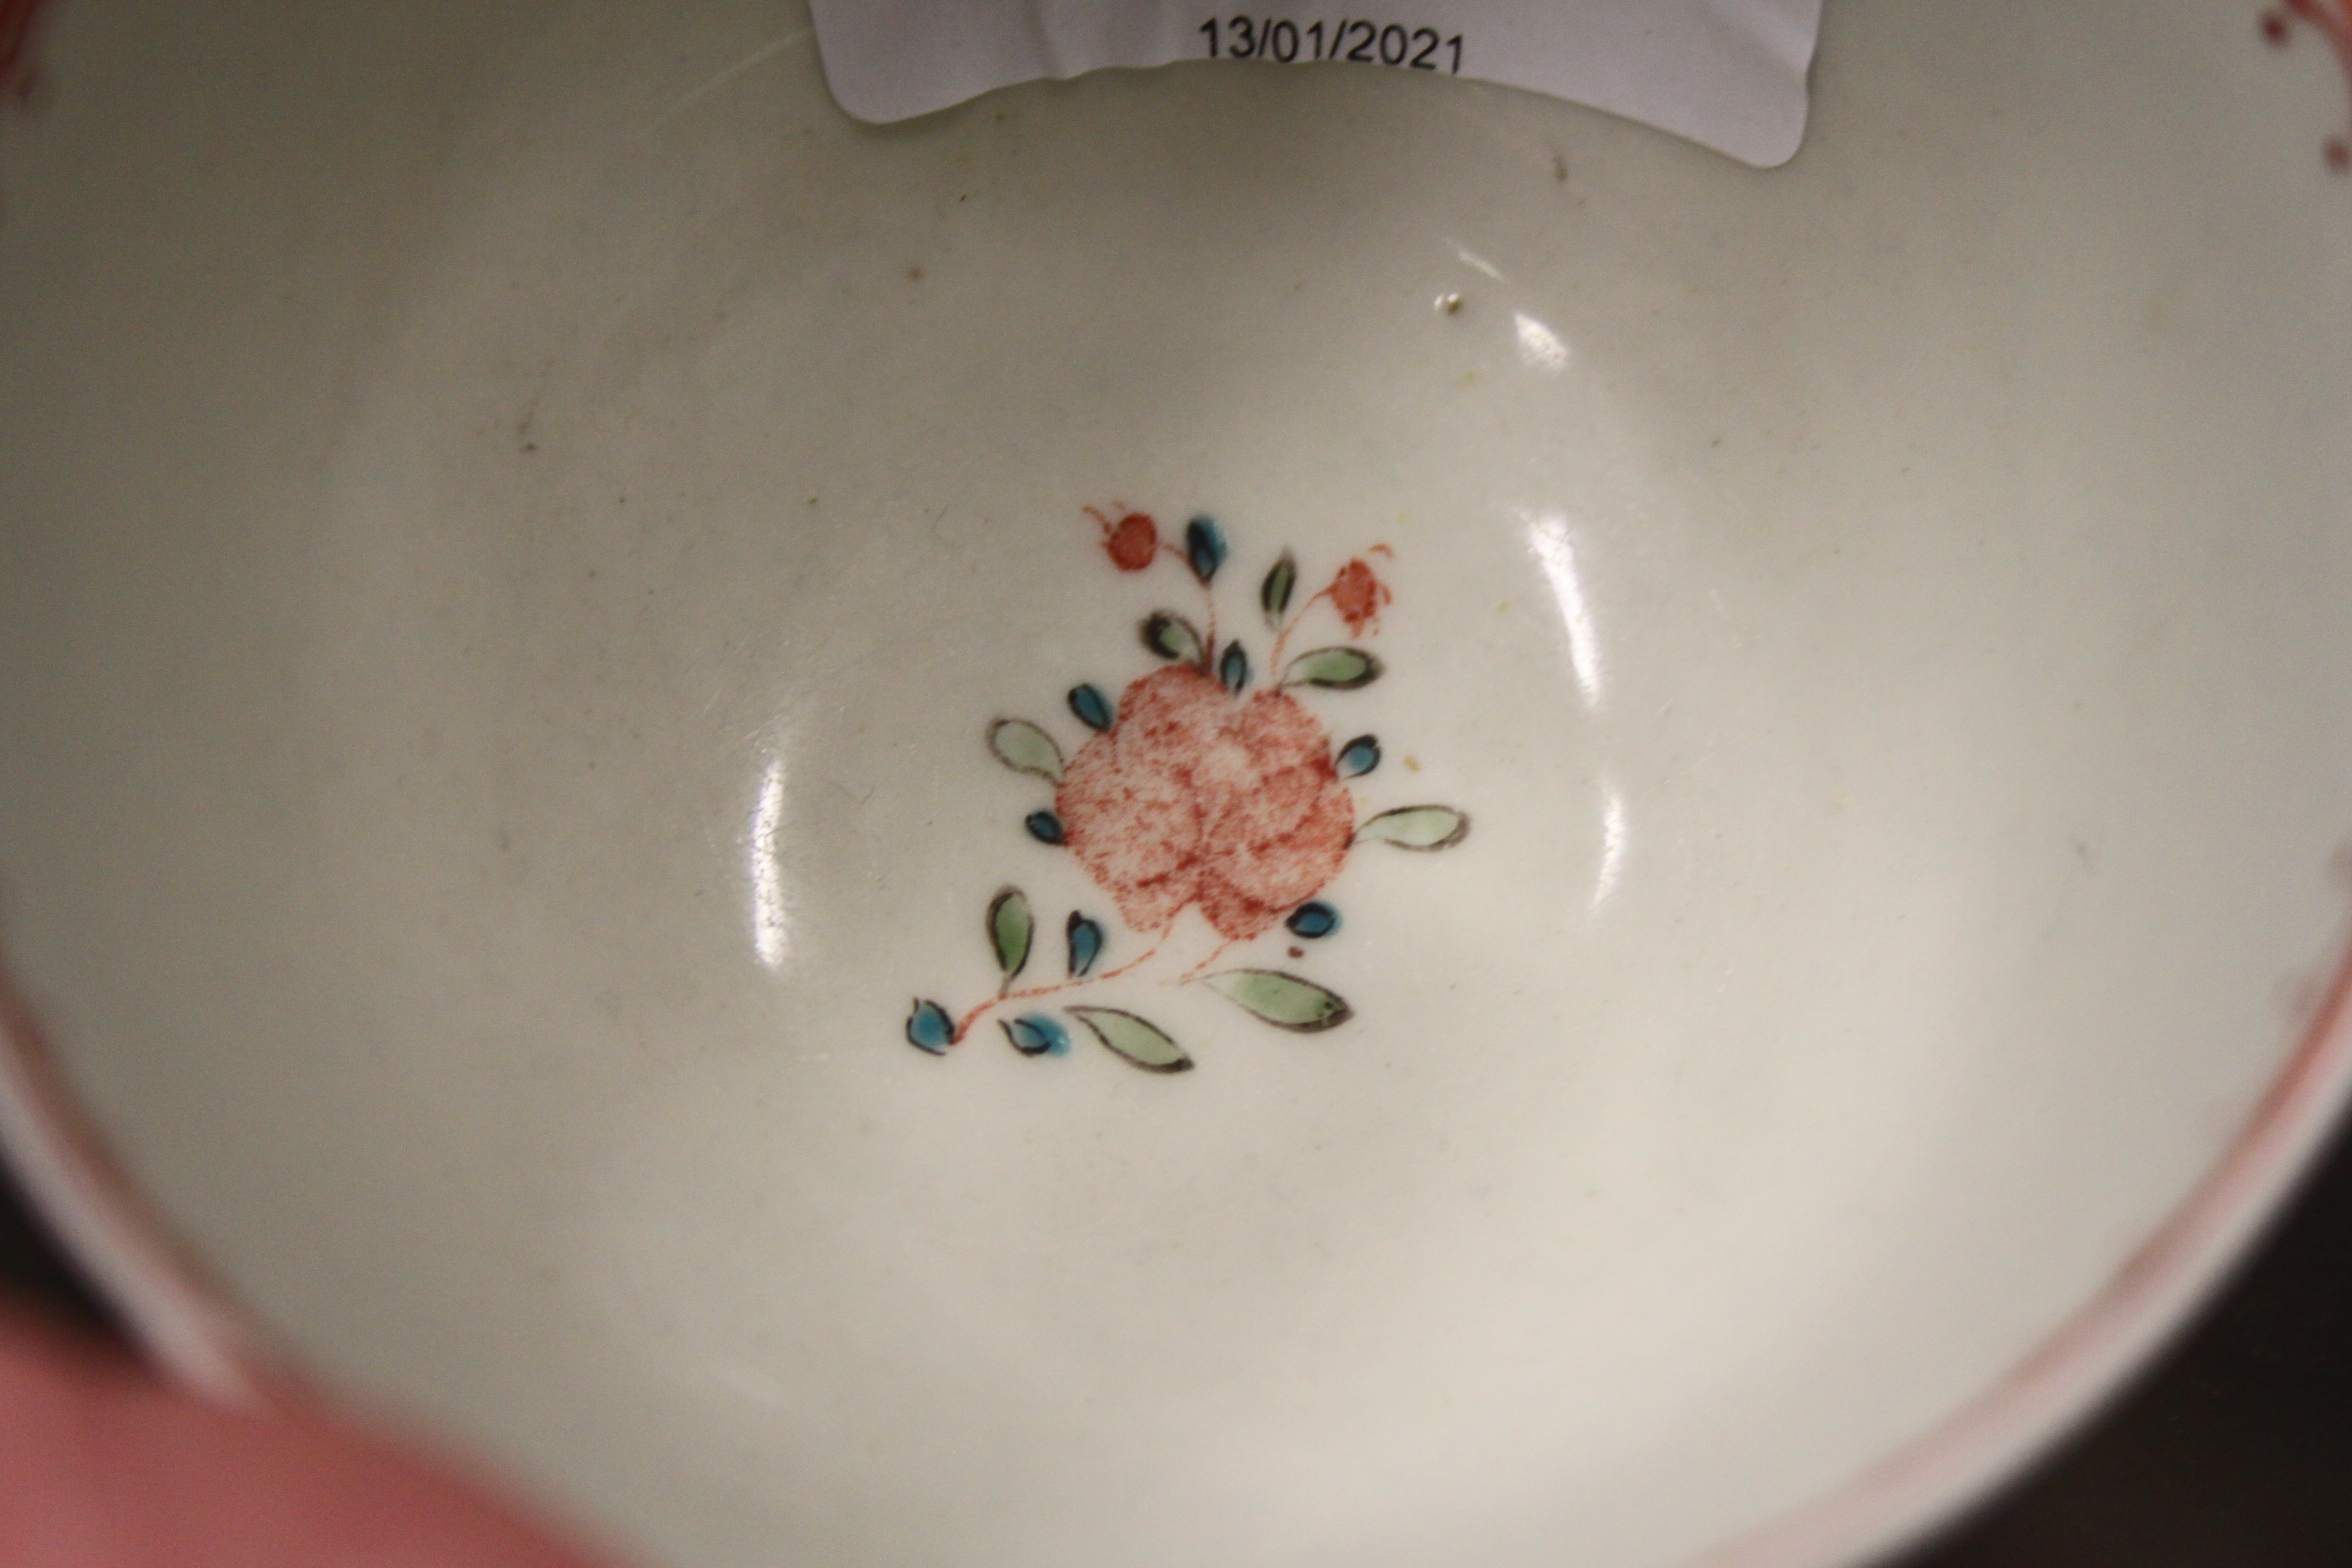 An 18th century English porcelain tea bowl, decorated insects and flowers, a Ridgeway jug with - Image 17 of 29